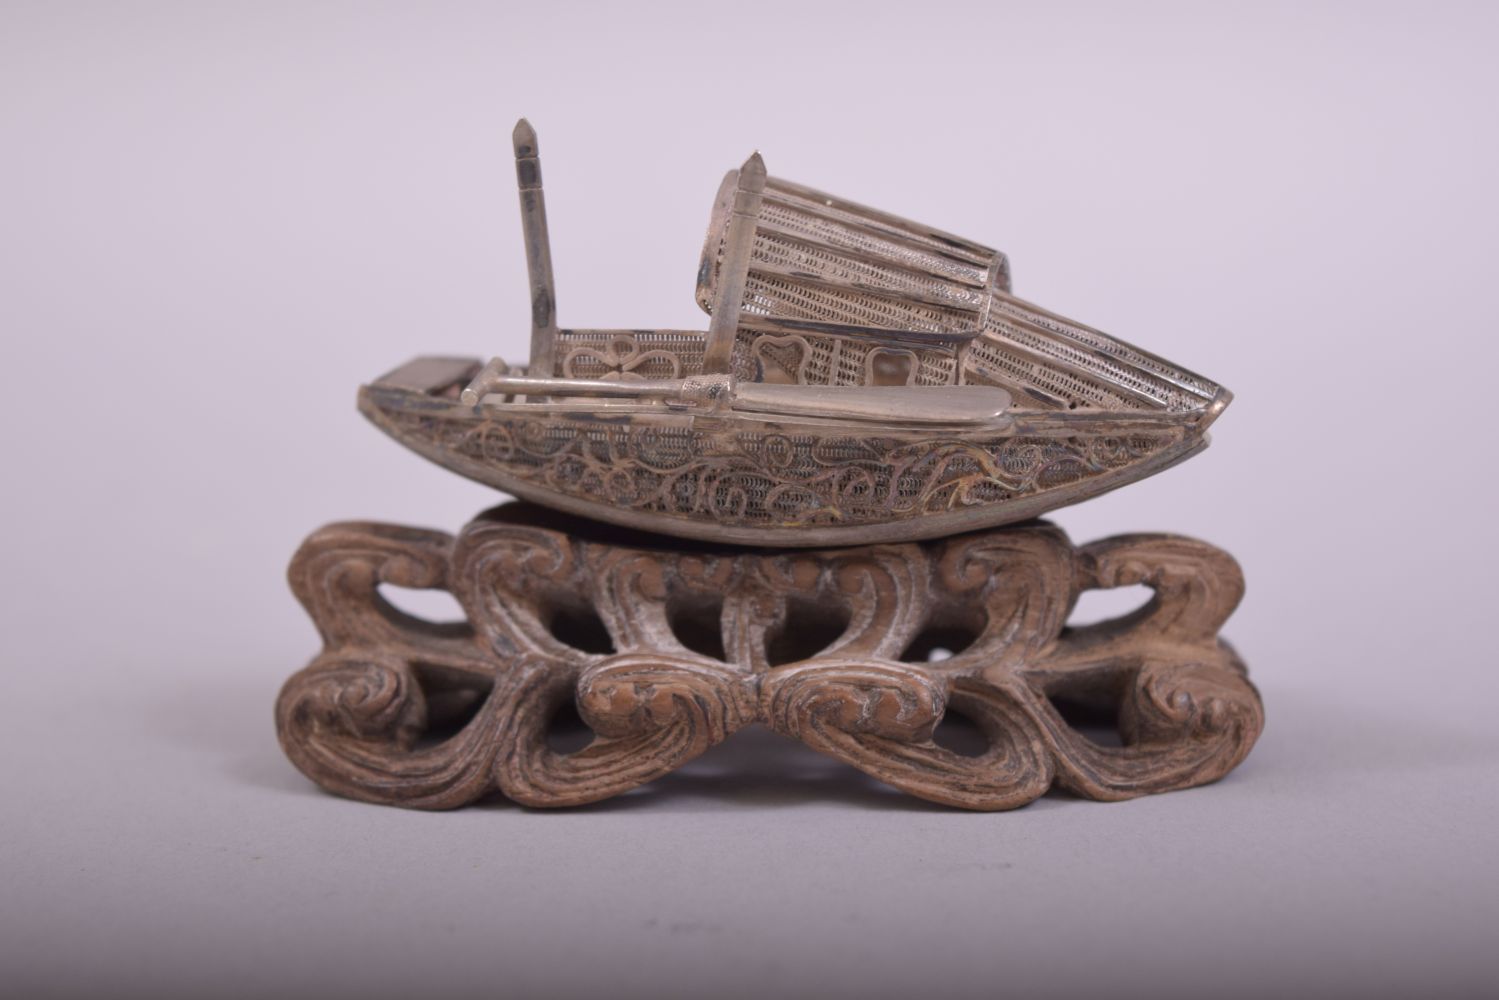 A SMALL CHINESE FILIGREE MODEL OF A JUNK, on a wooden stand, 7.5cm long. - Image 3 of 7